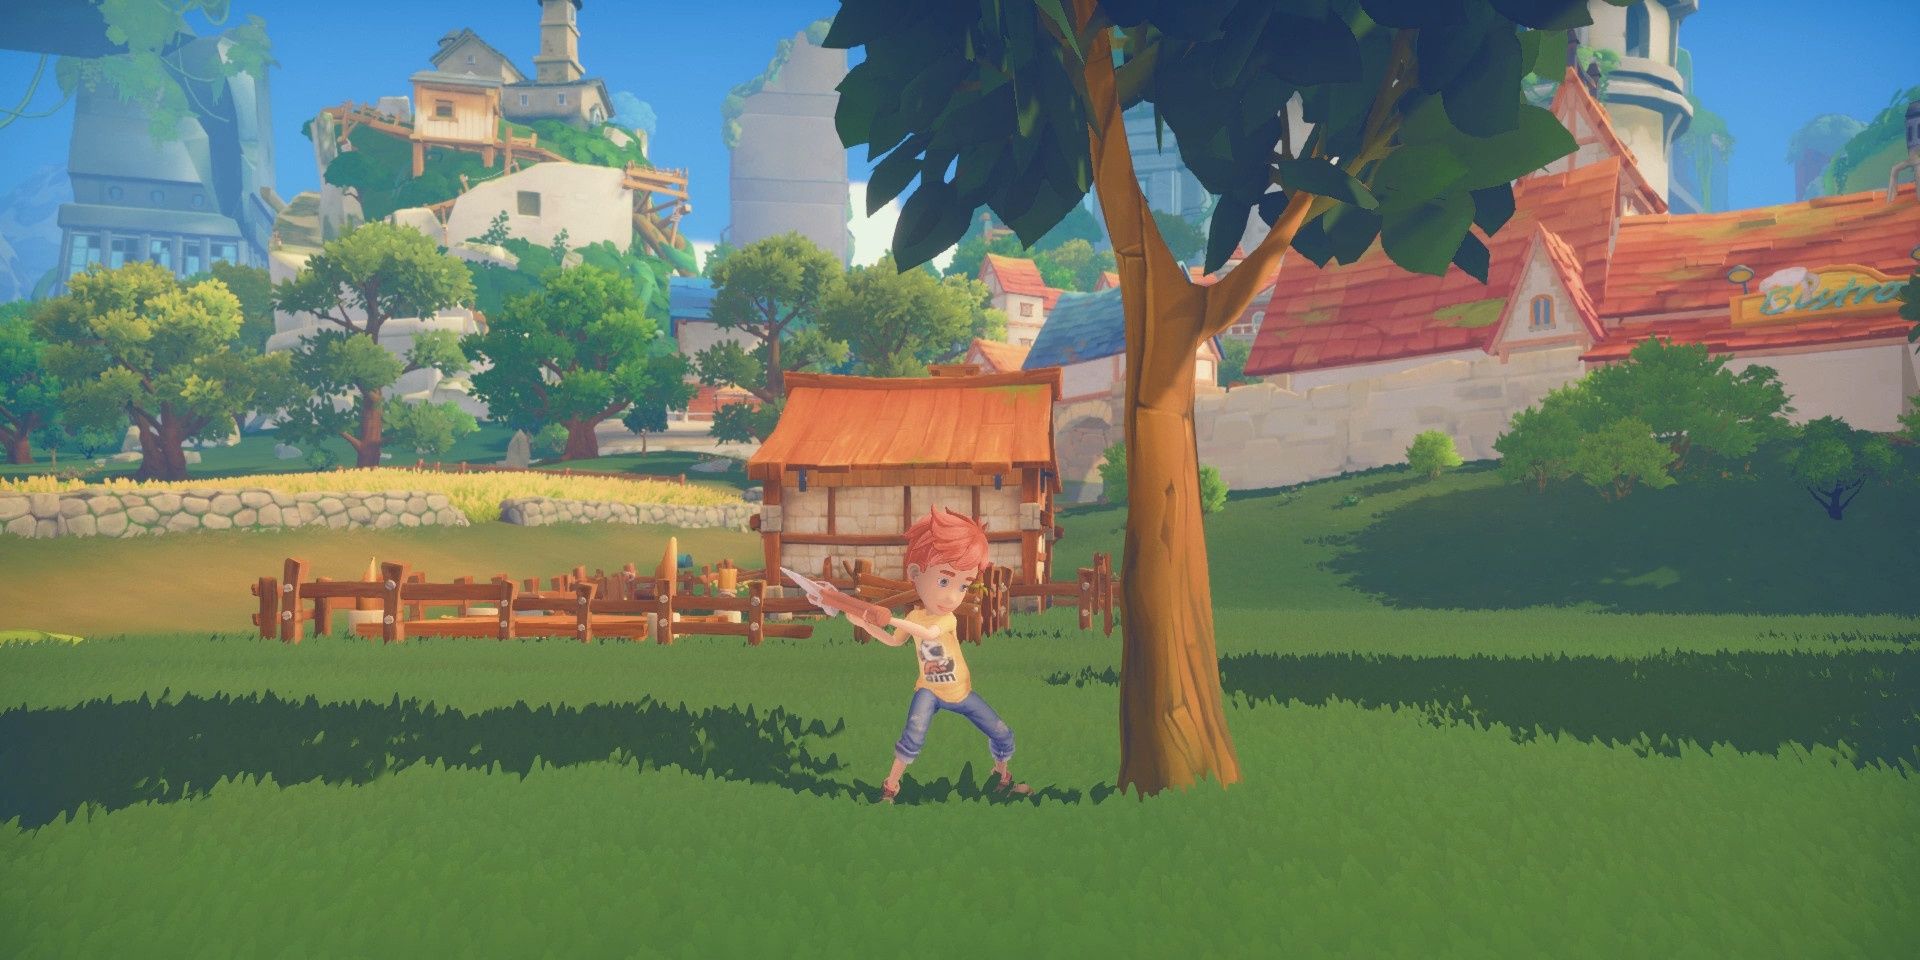 My Time At Portia avatar hacking at tree in farm village